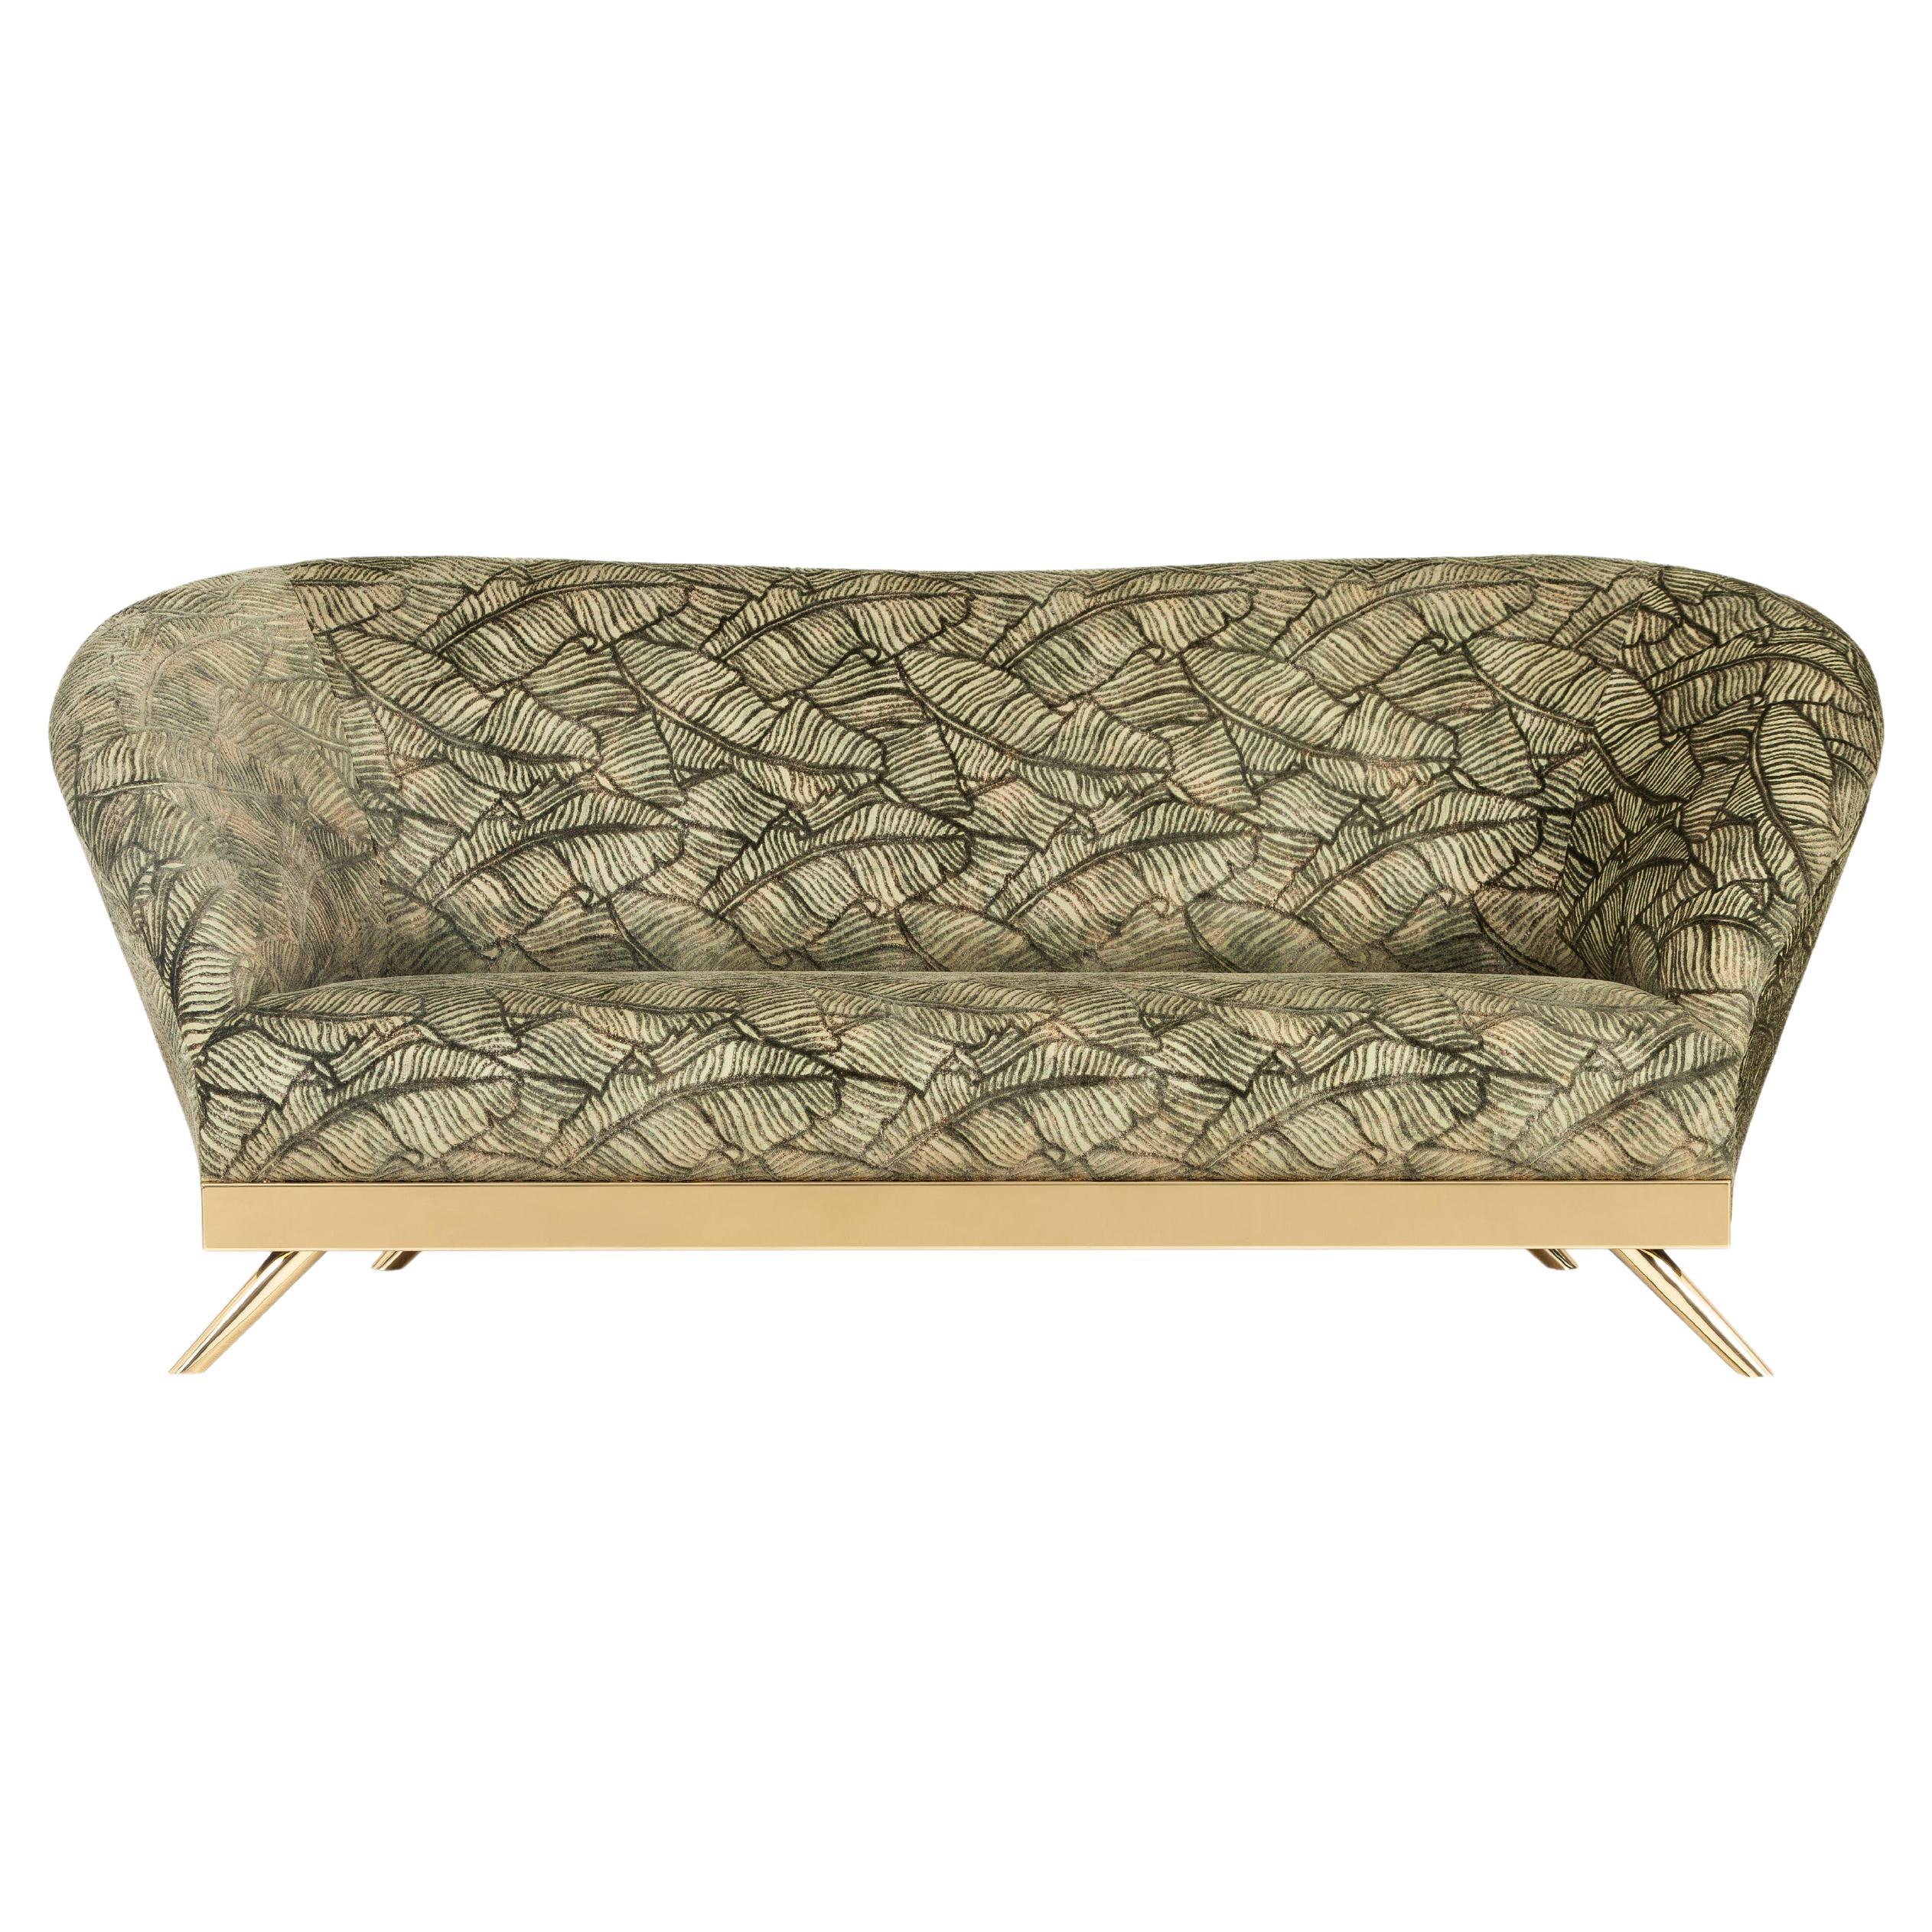 Hand-Crafted Cambridge Loveseat Sofa in the Style of 1930's Handmade Portugal by Greenapple For Sale